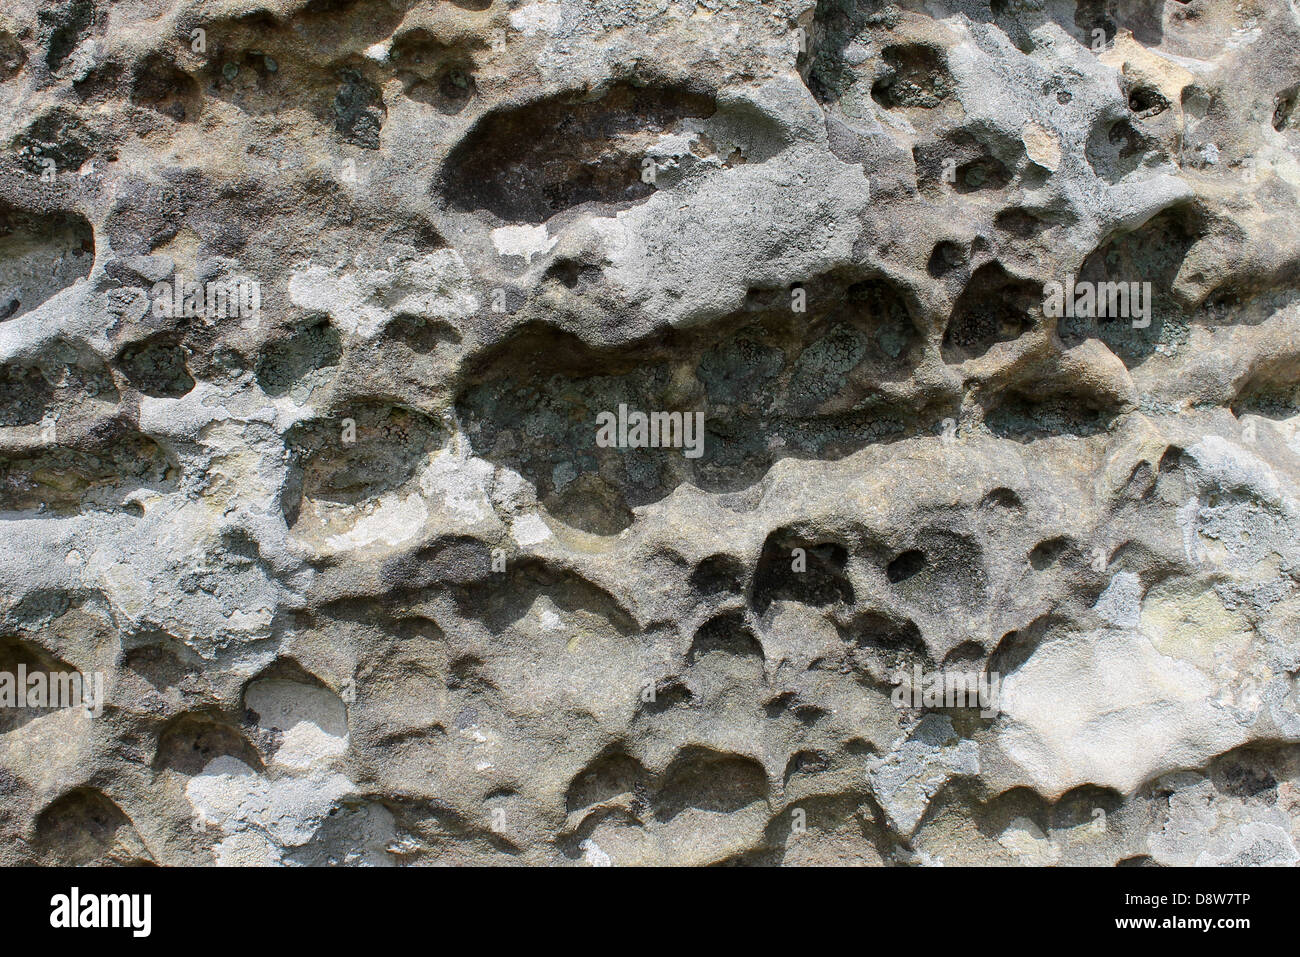 Abstract background of textured rock or stone. Stock Photo